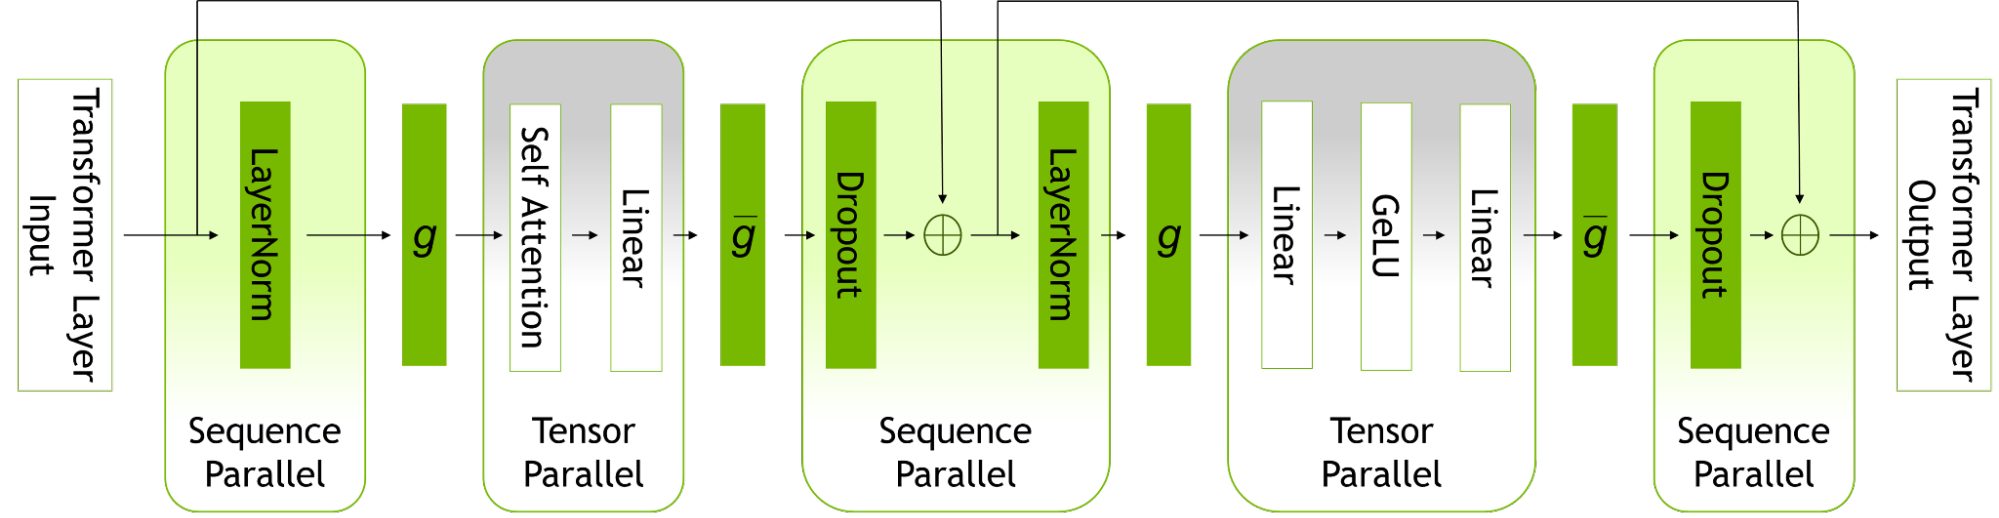 Graphic showing that sequence parallelism is used in LayerNorm and Dropout layers, while tensor parallelism is used in attention and FFN layers.